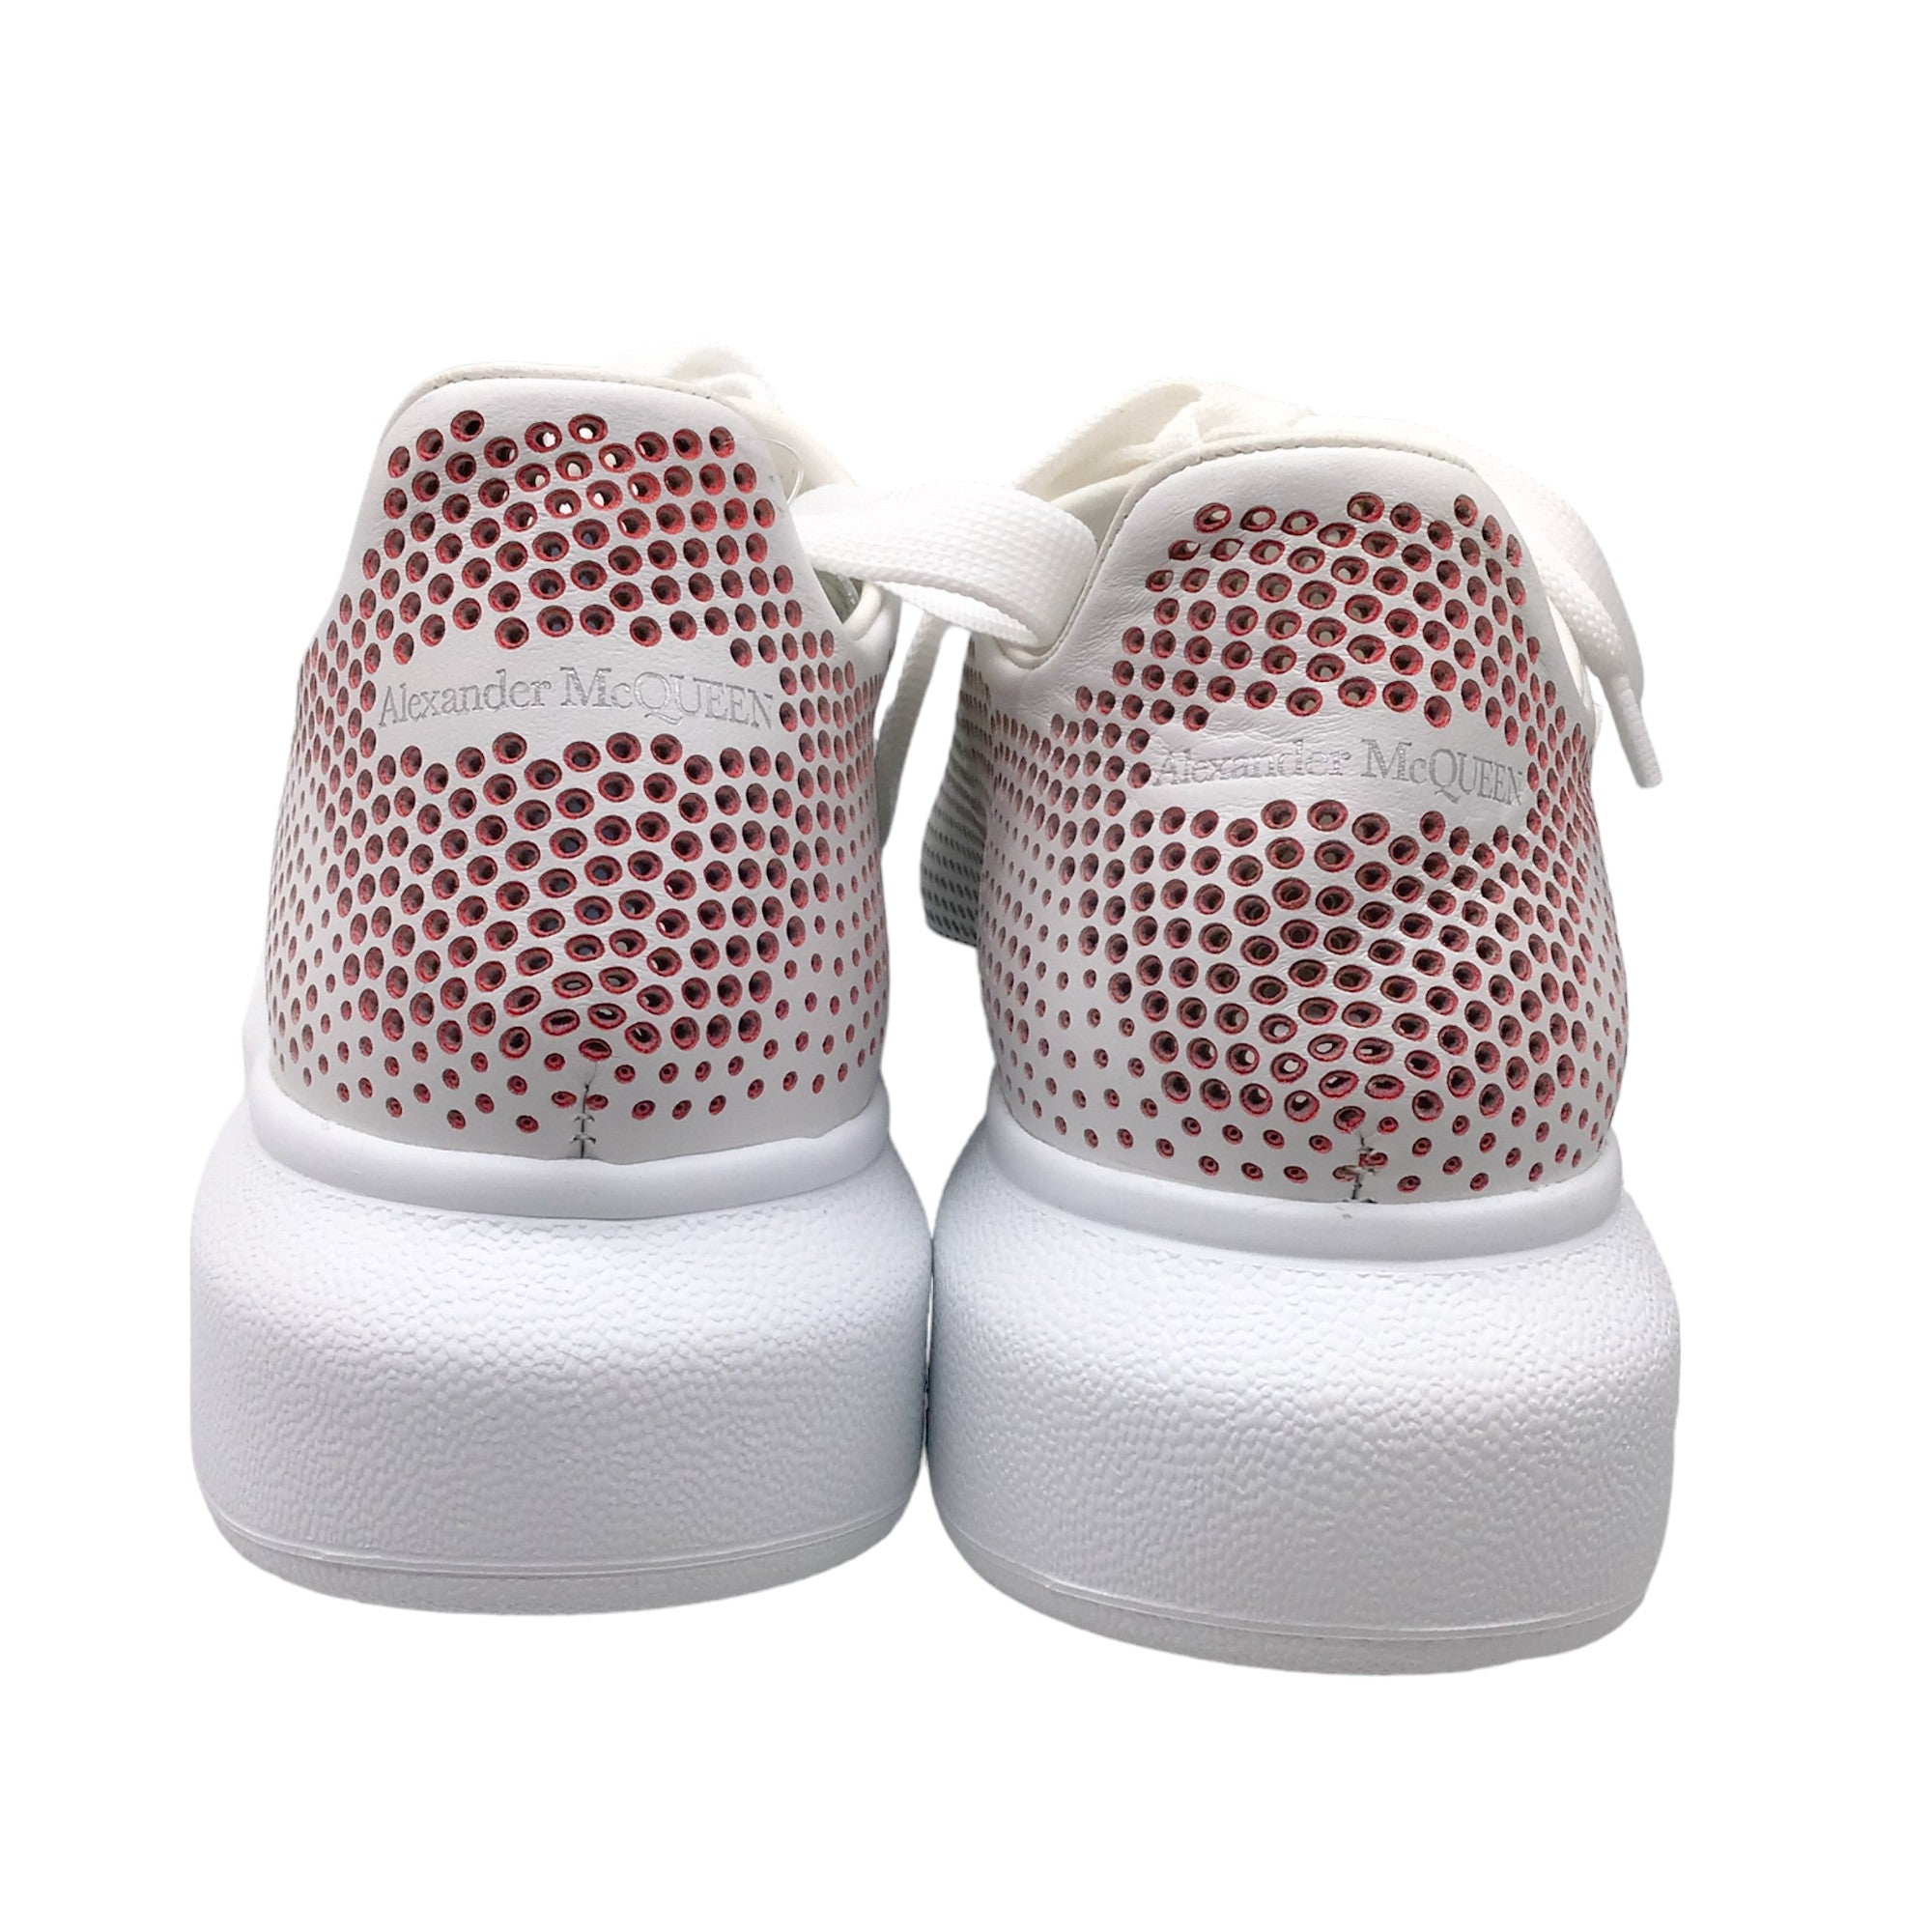 Alexander McQueen White / Red Larry Oversized Perforated Leather Low-Top Sneakers